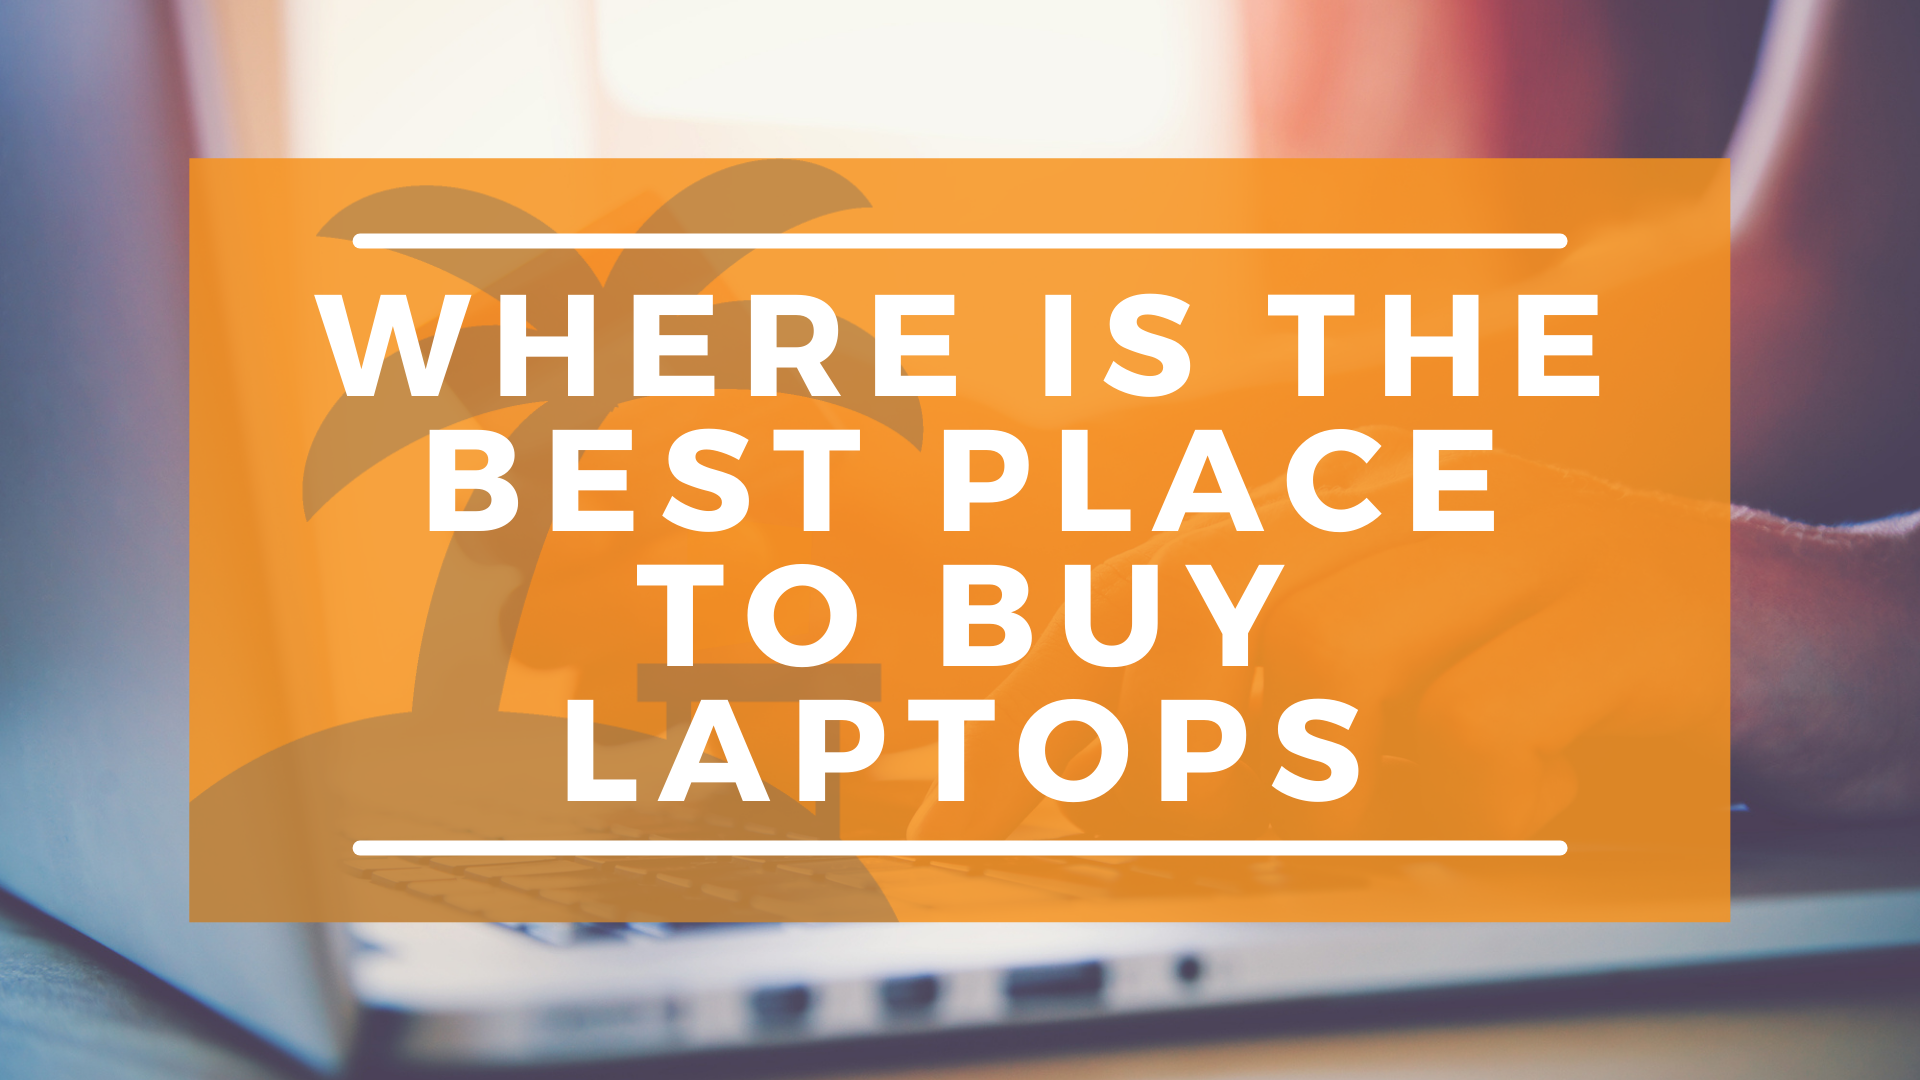 The BEST Reddit Laptops From Other Users